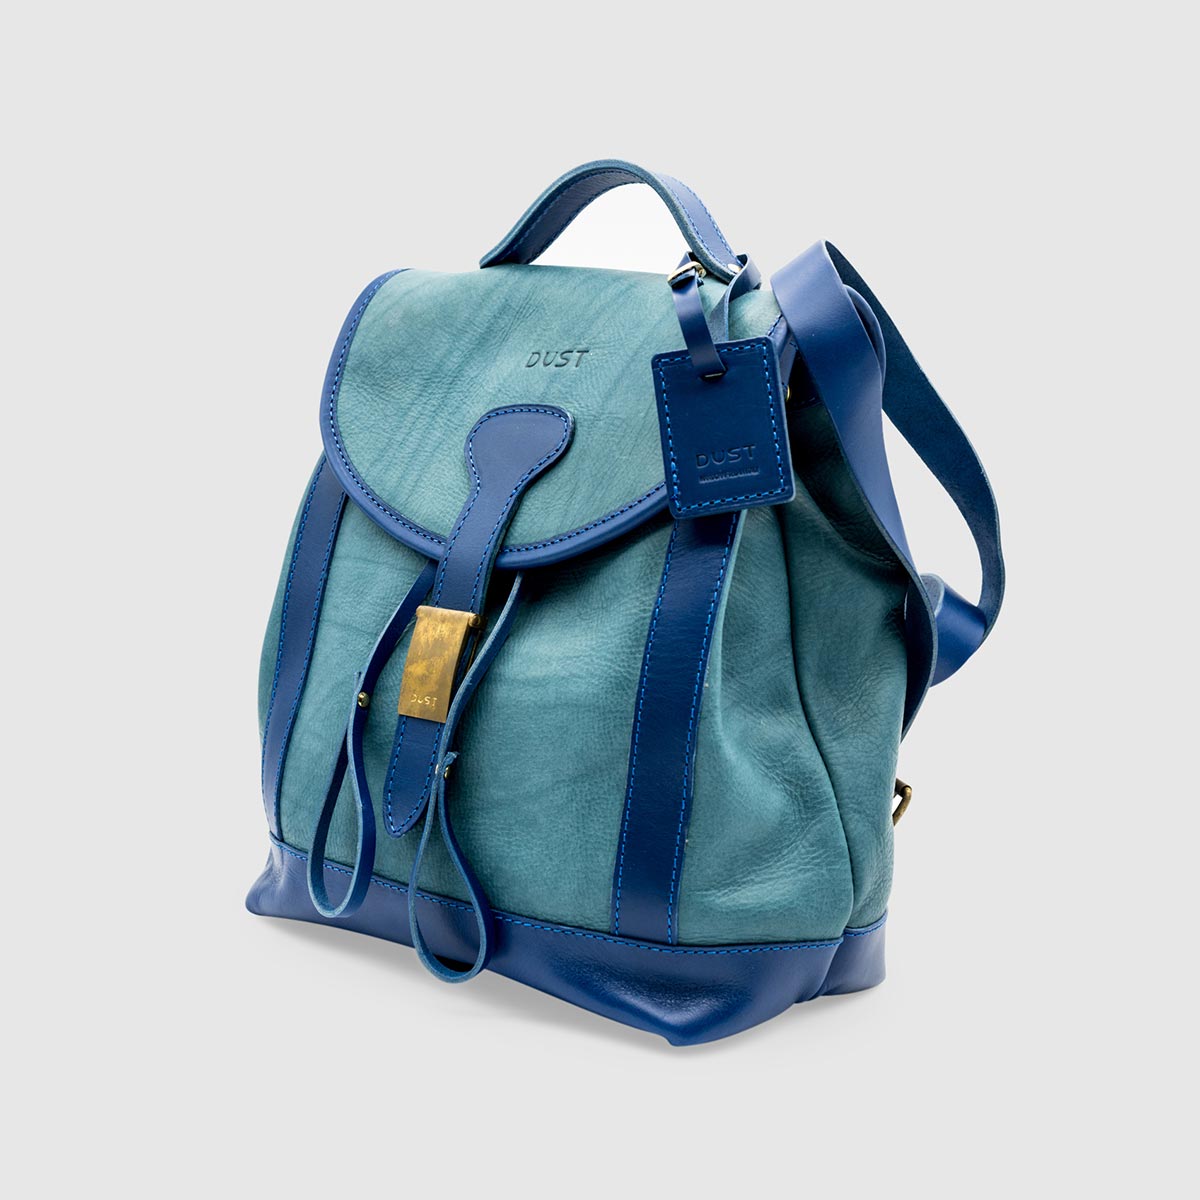 Vegetable Tumbled Leather Backpack – Light Blue Leather The Dust on sale 2022 2